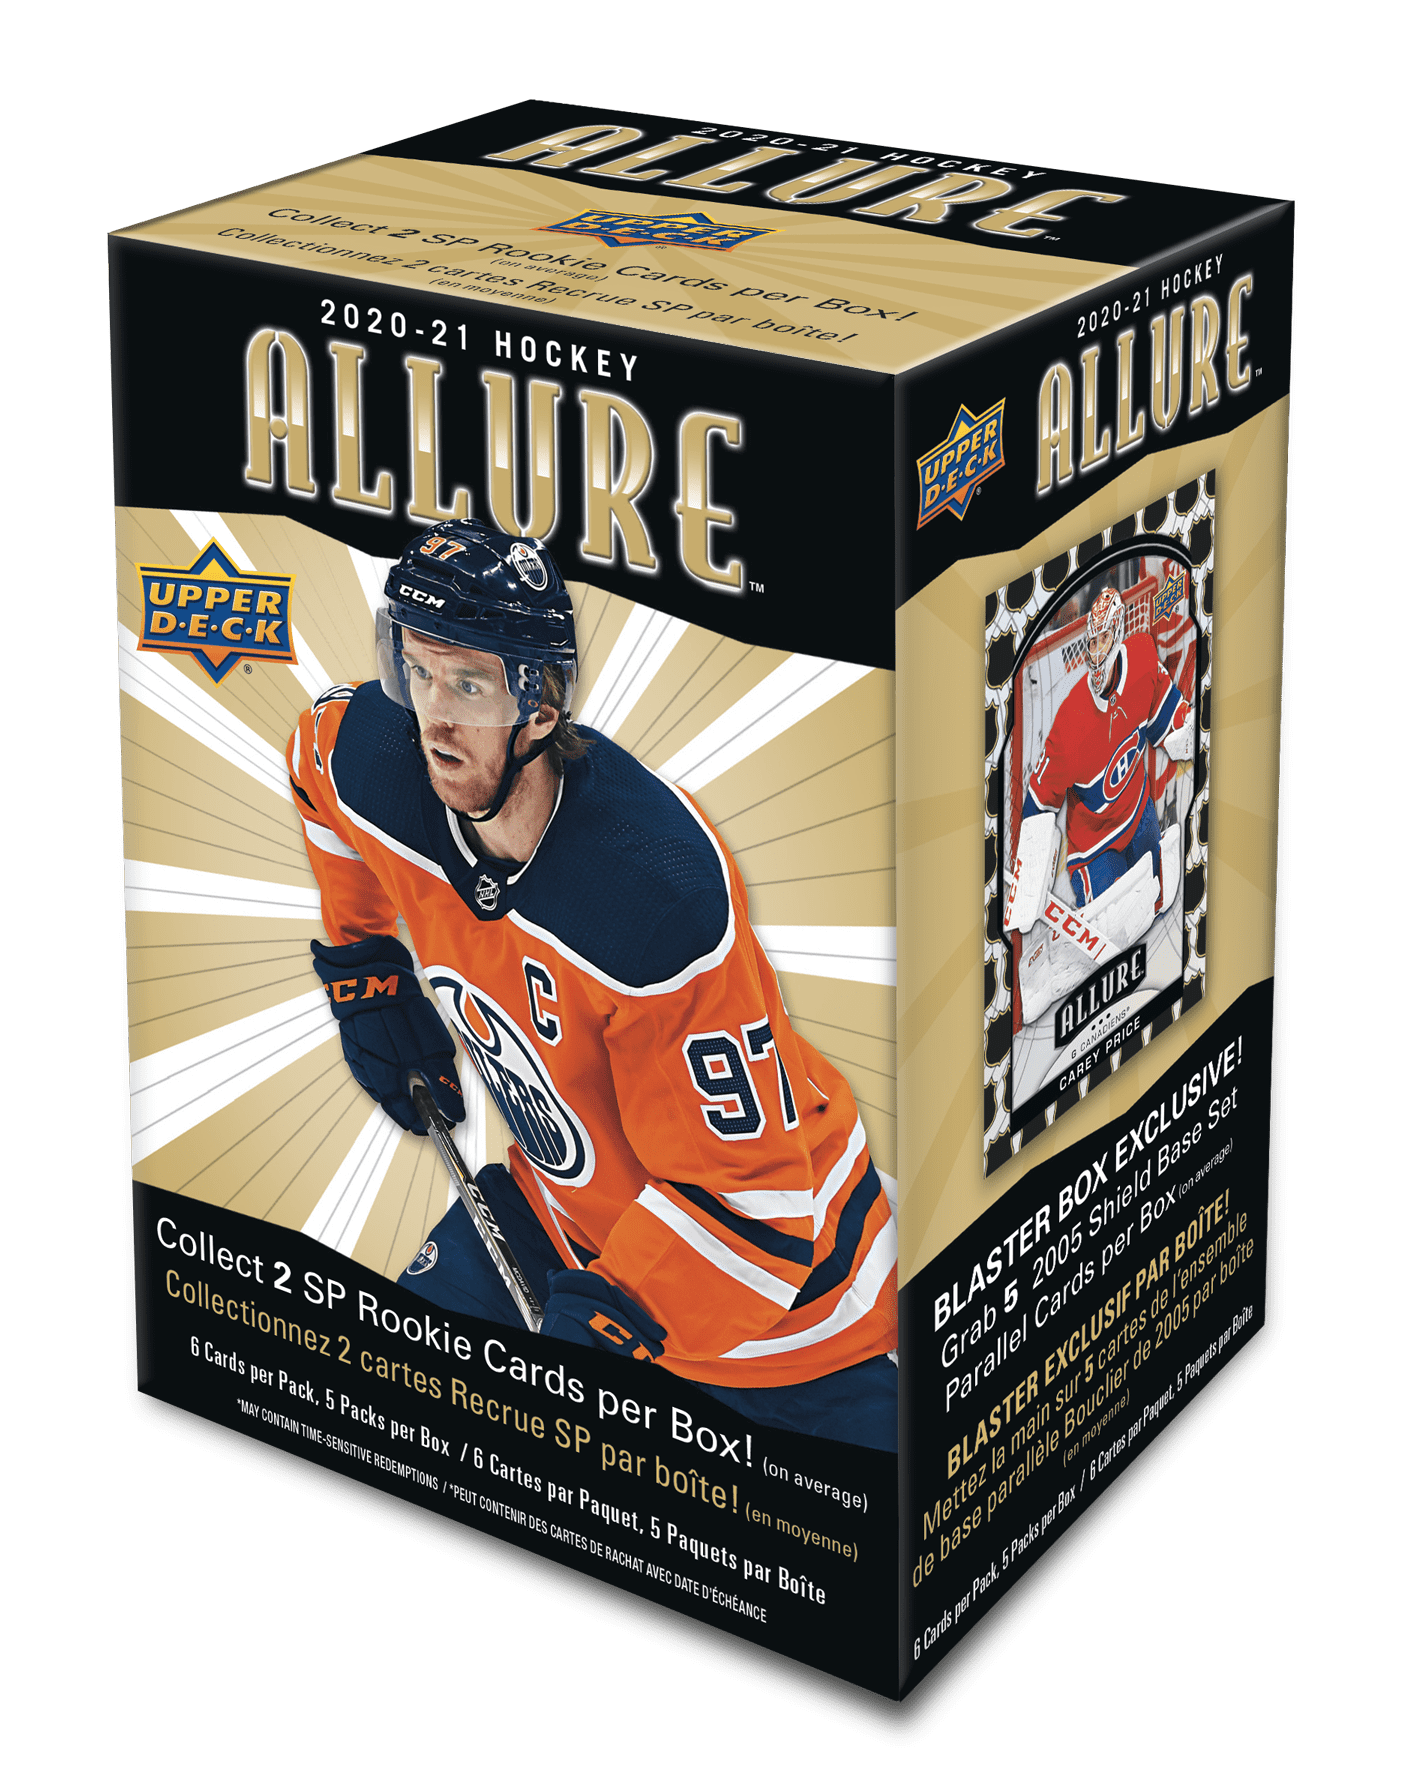 Upper Deck 2020-21 Allure NHL Hockey Trading Cards Blaster Box- 2 SP Rookie Cards | 30 Cards